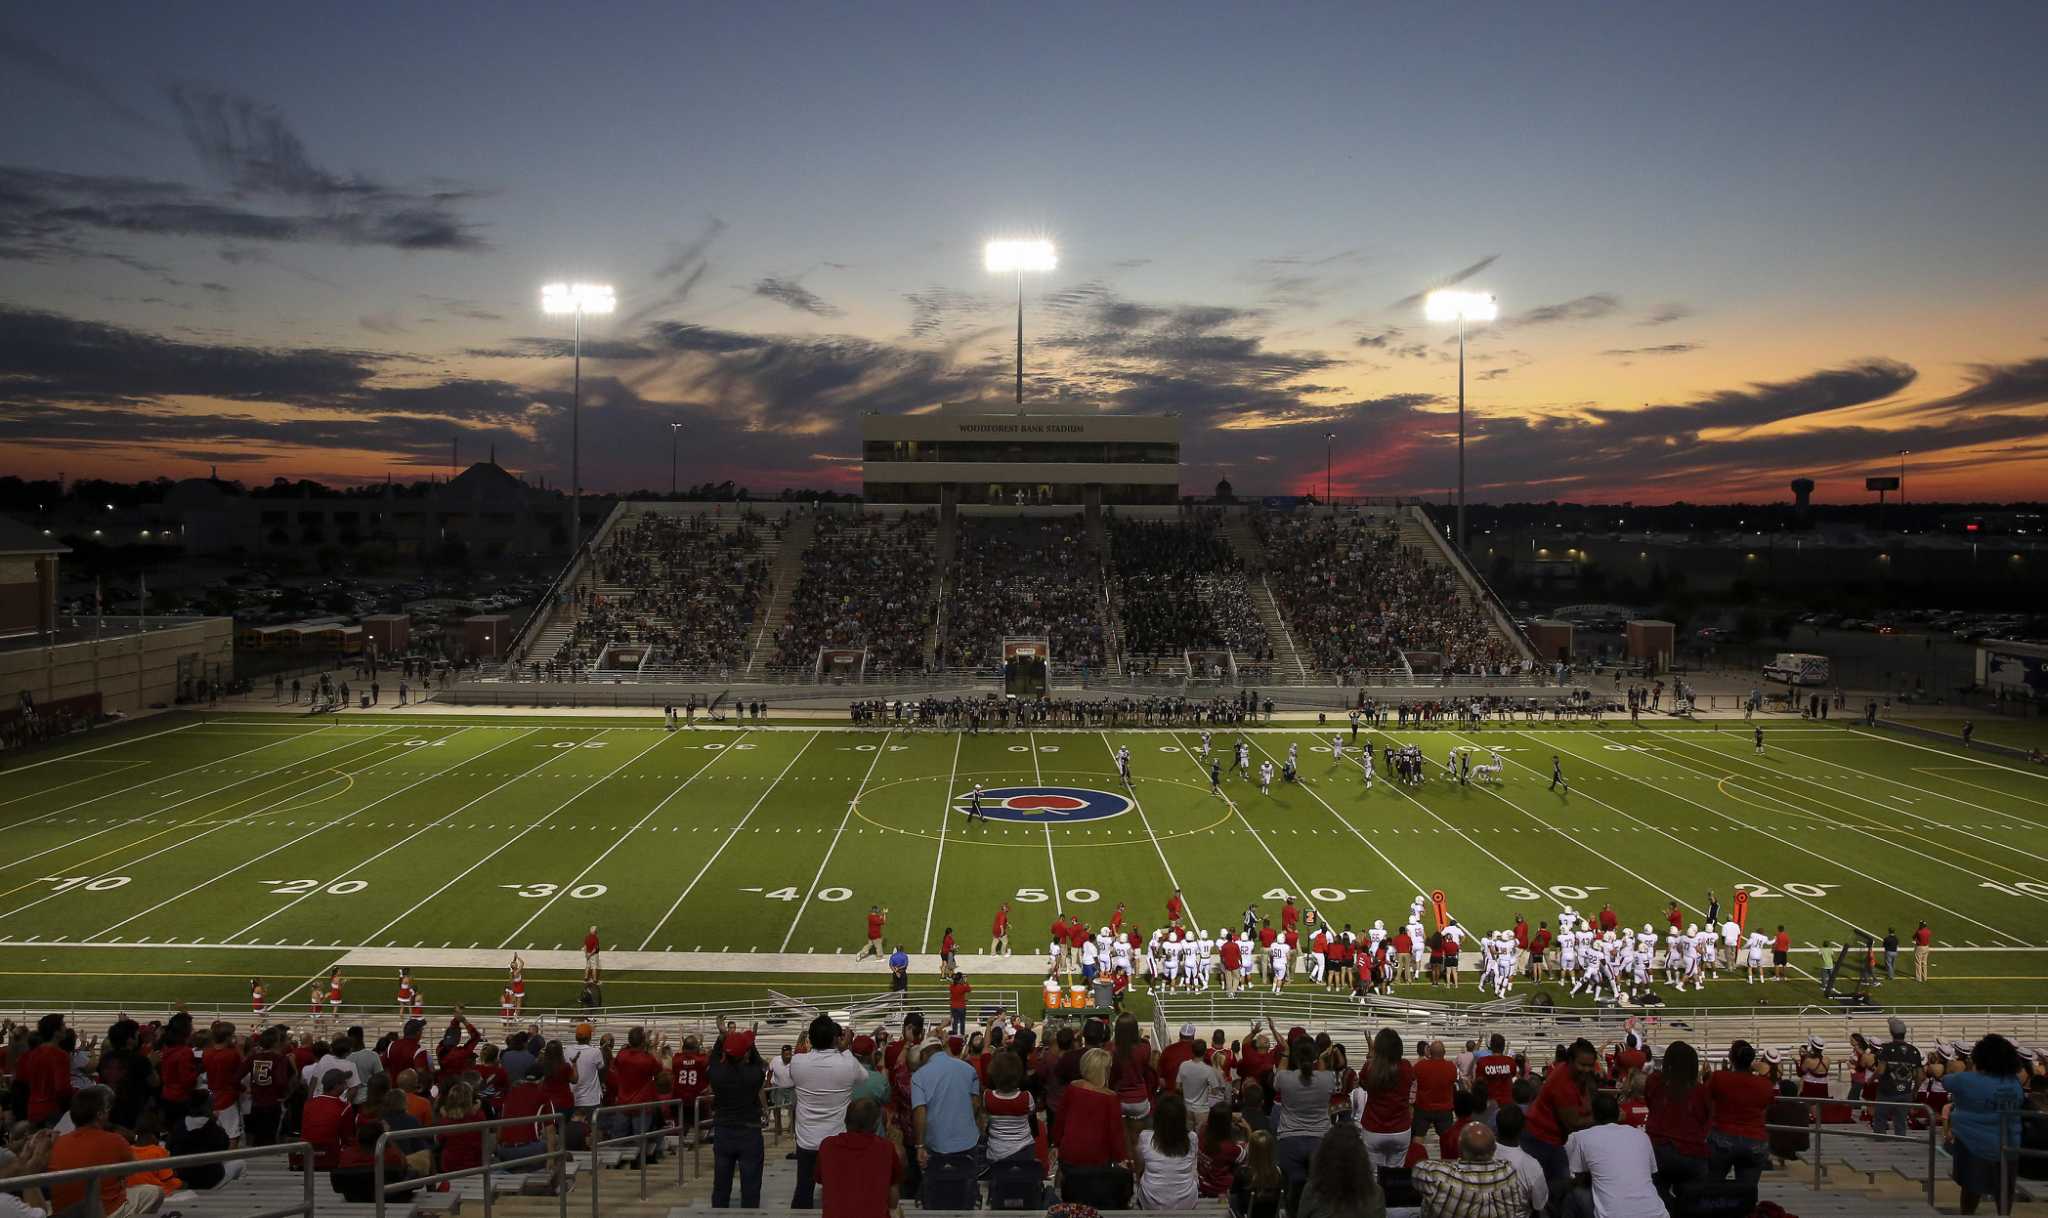 NCAA FOOTBALL Woodforest Bank Stadium on display for Stagg Bowl